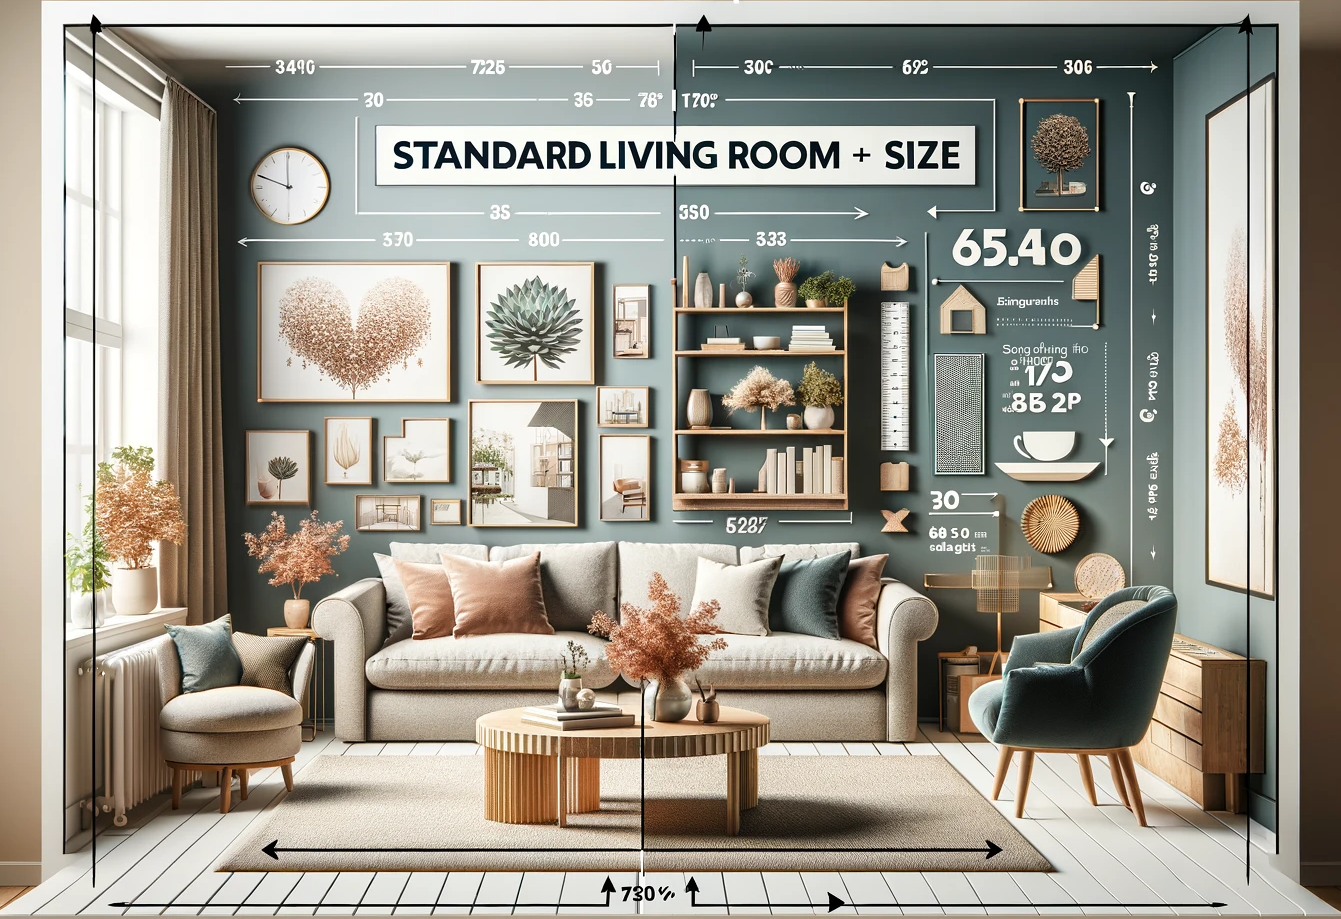 Standard Living Room Size: Secrets to a Perfectly Balanced Space